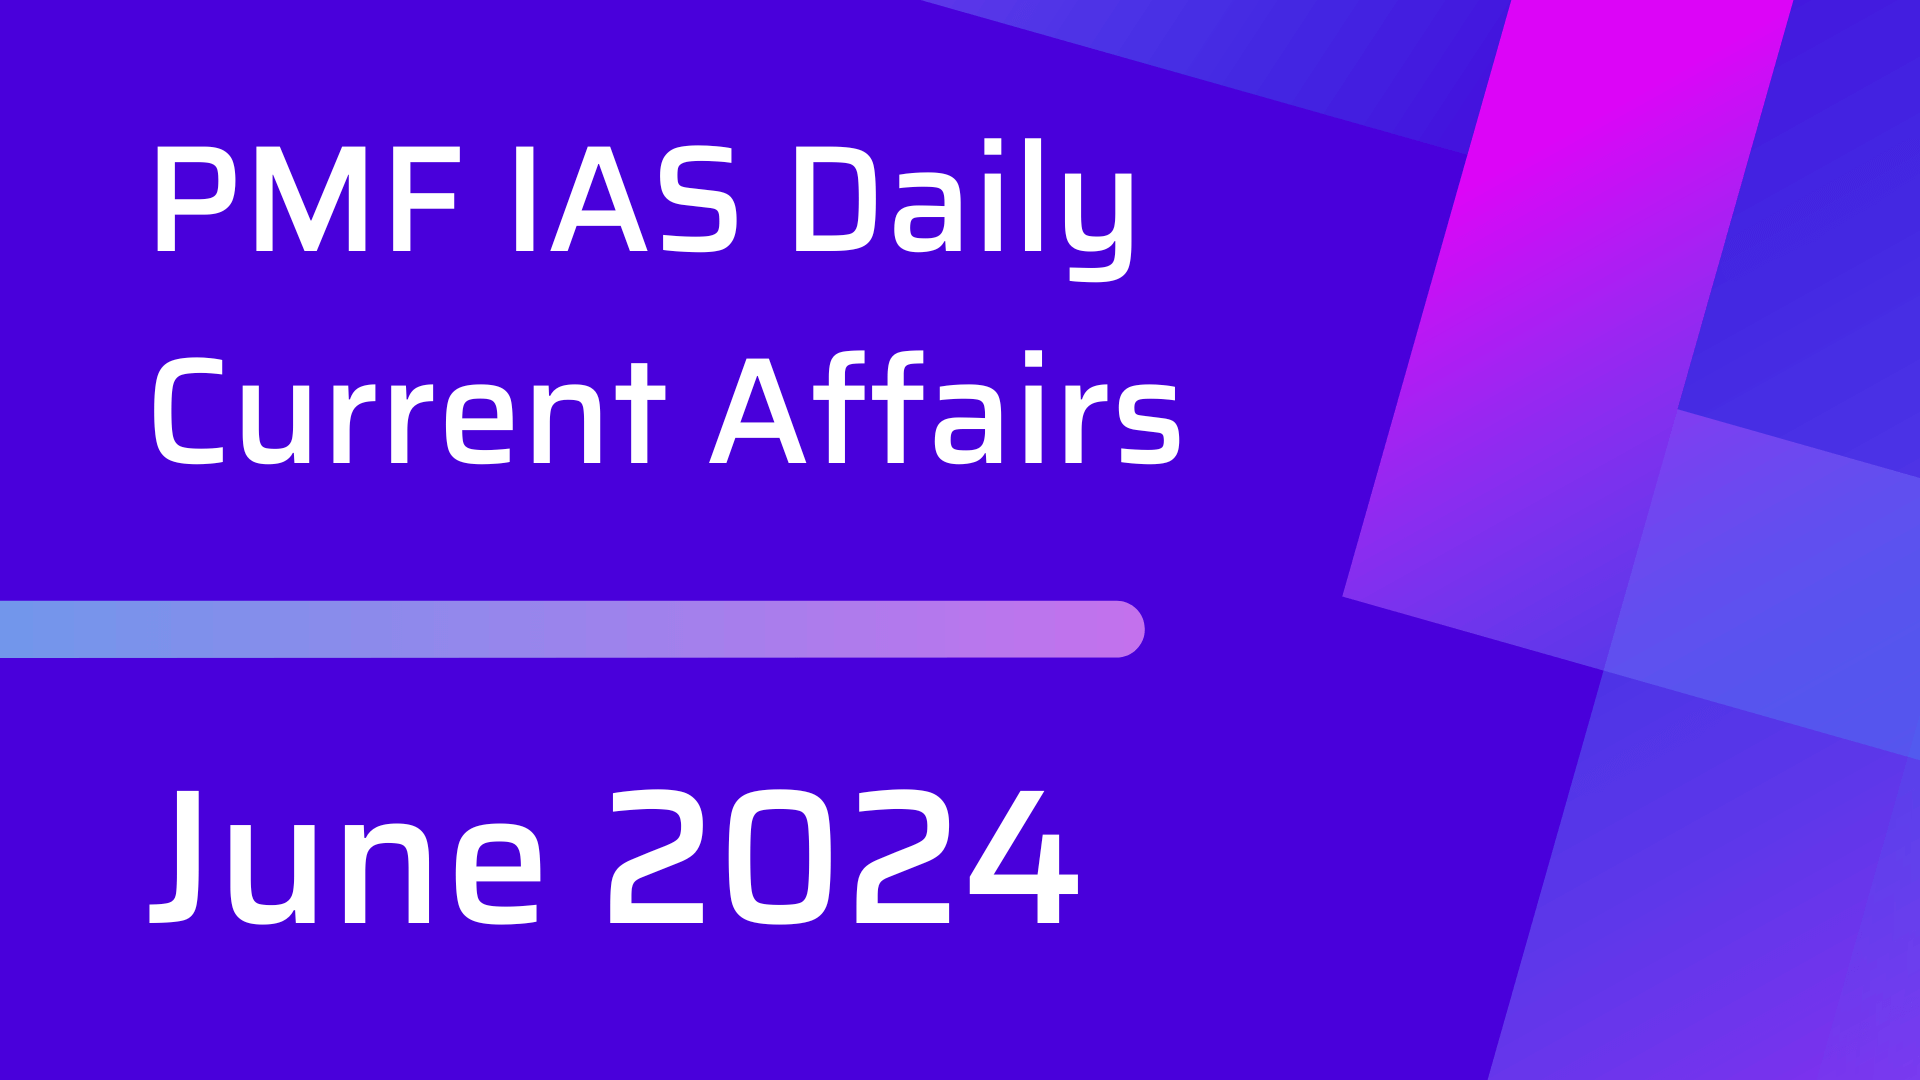 PMF IAS Daily Current Affairs June 2024